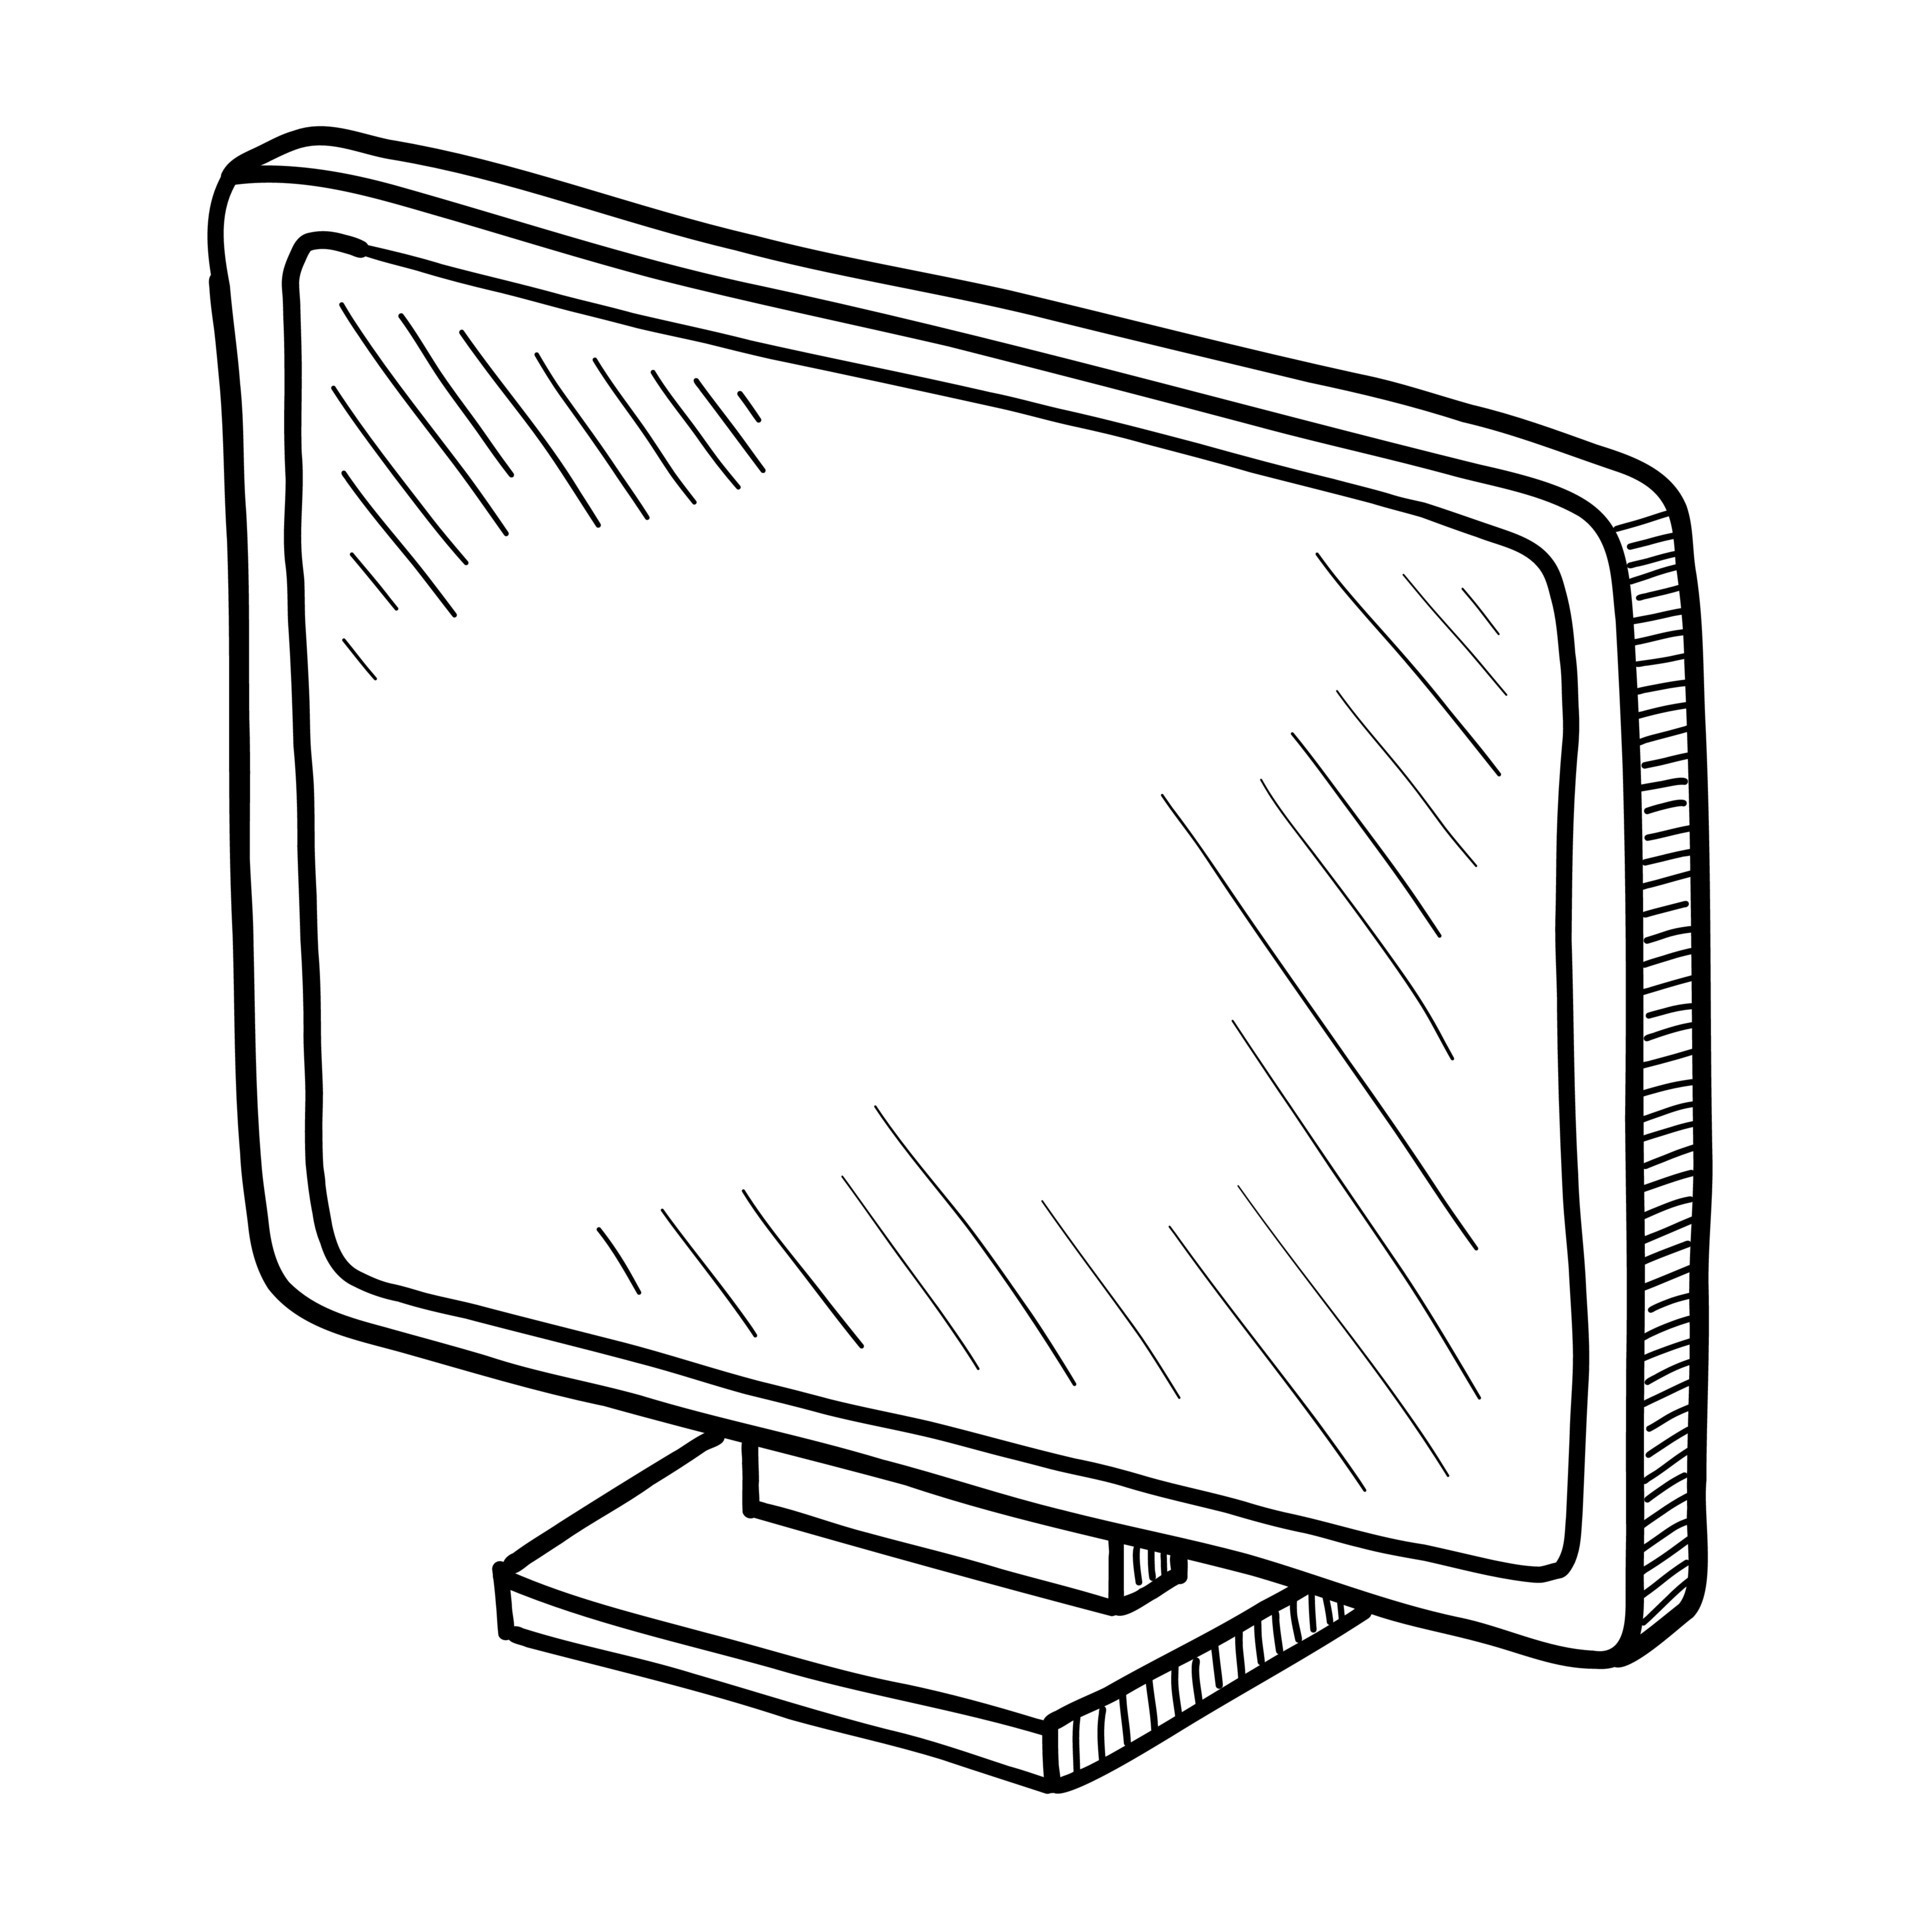 Computer Terminal Monitor Keyboard Drawing High-Res Vector Graphic - Getty  Images